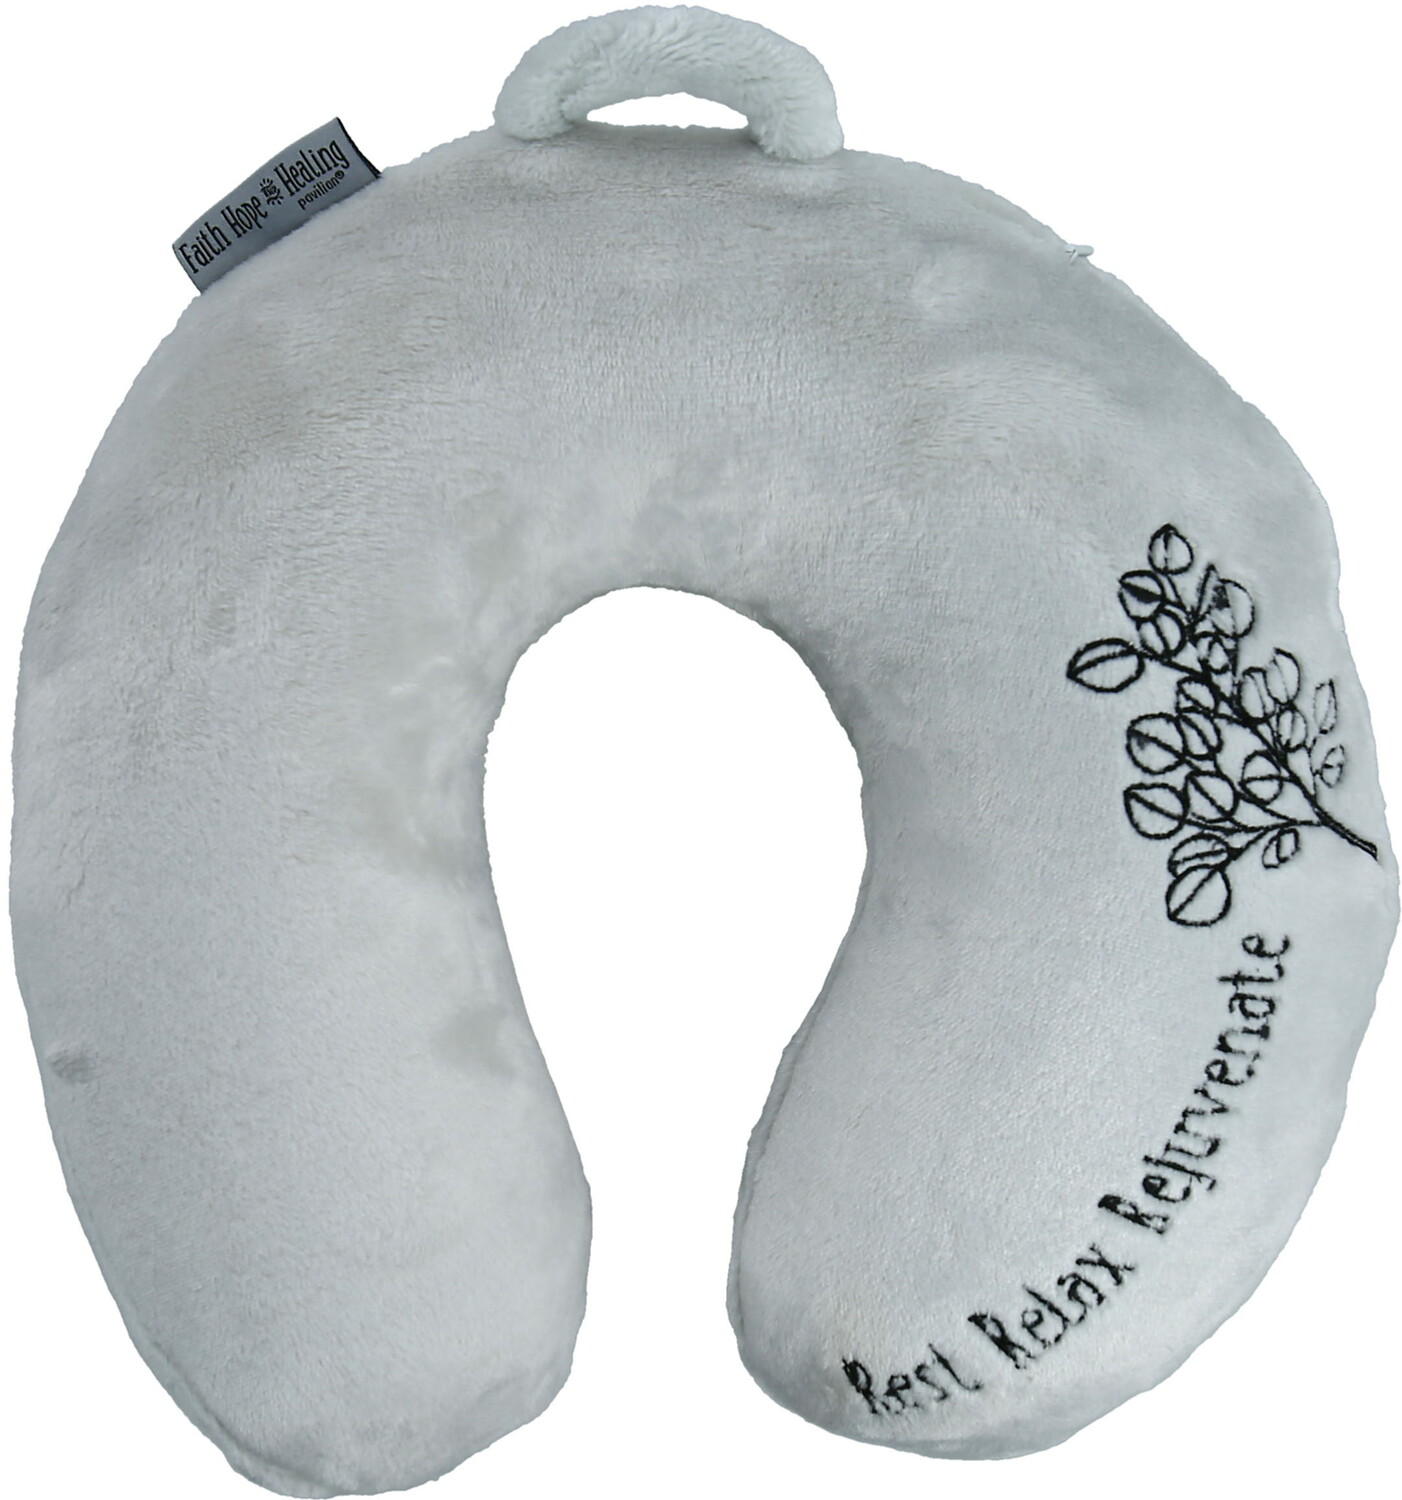 Relax by Faith Hope and Healing - Relax - Royal Plush Neck Pillow